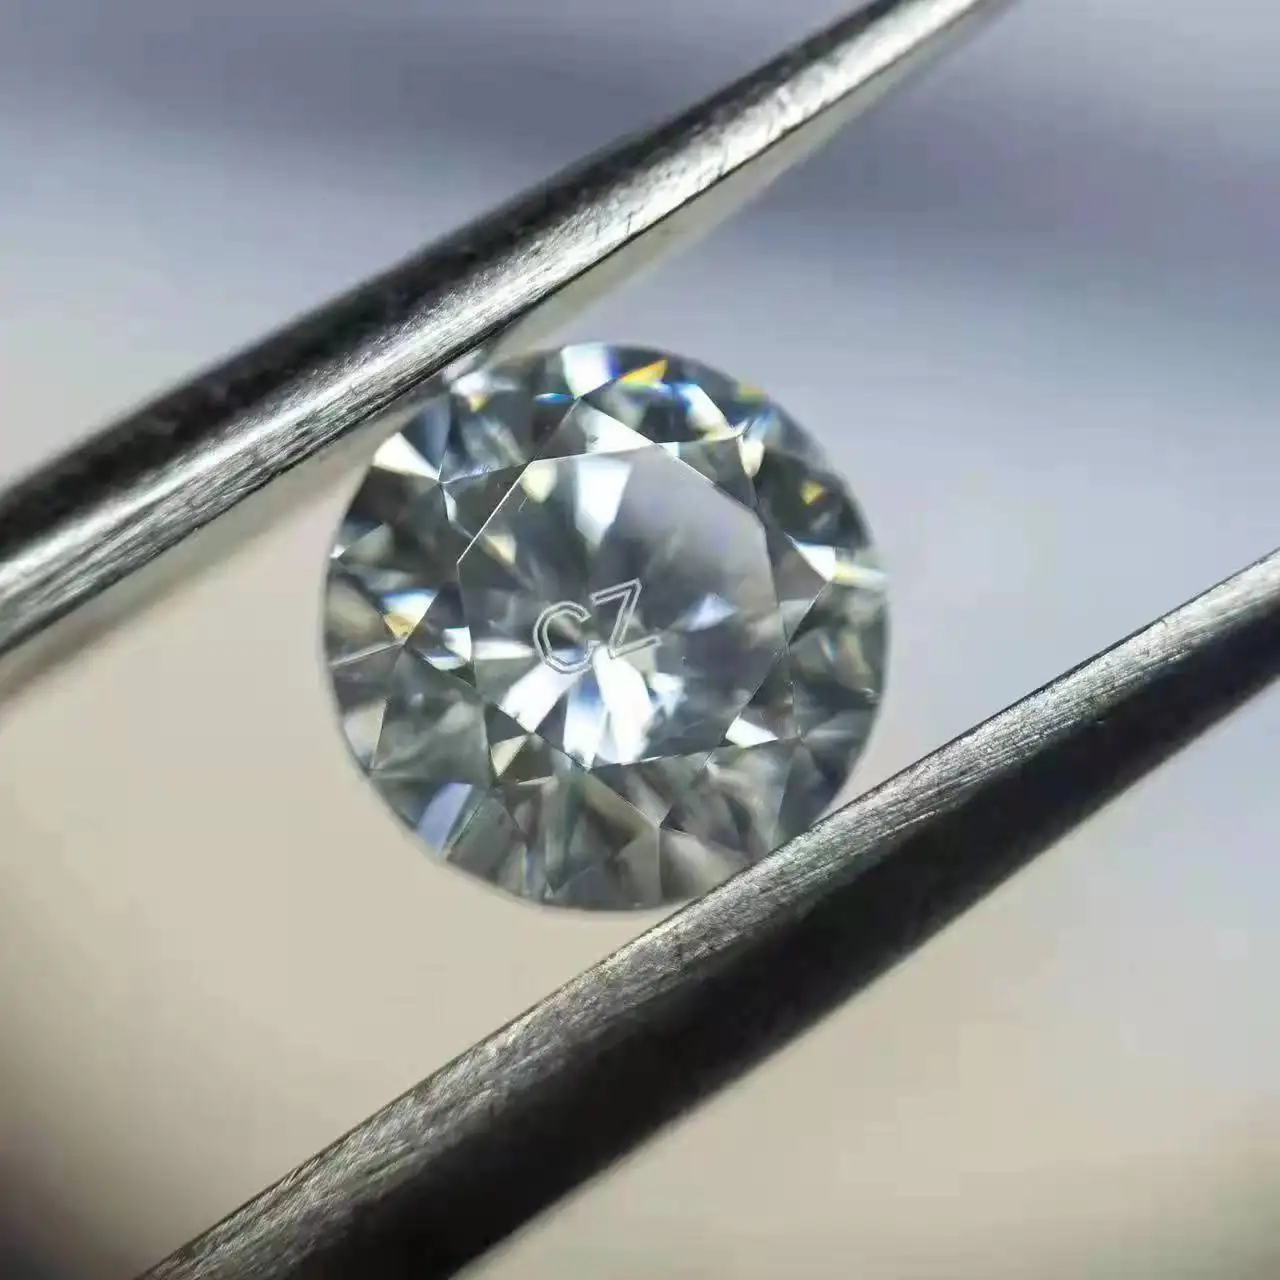 High Quality 3-15mm White Round Loose Cubic Zirconia CZ Gems Loose Stone Used for jewelry inlay